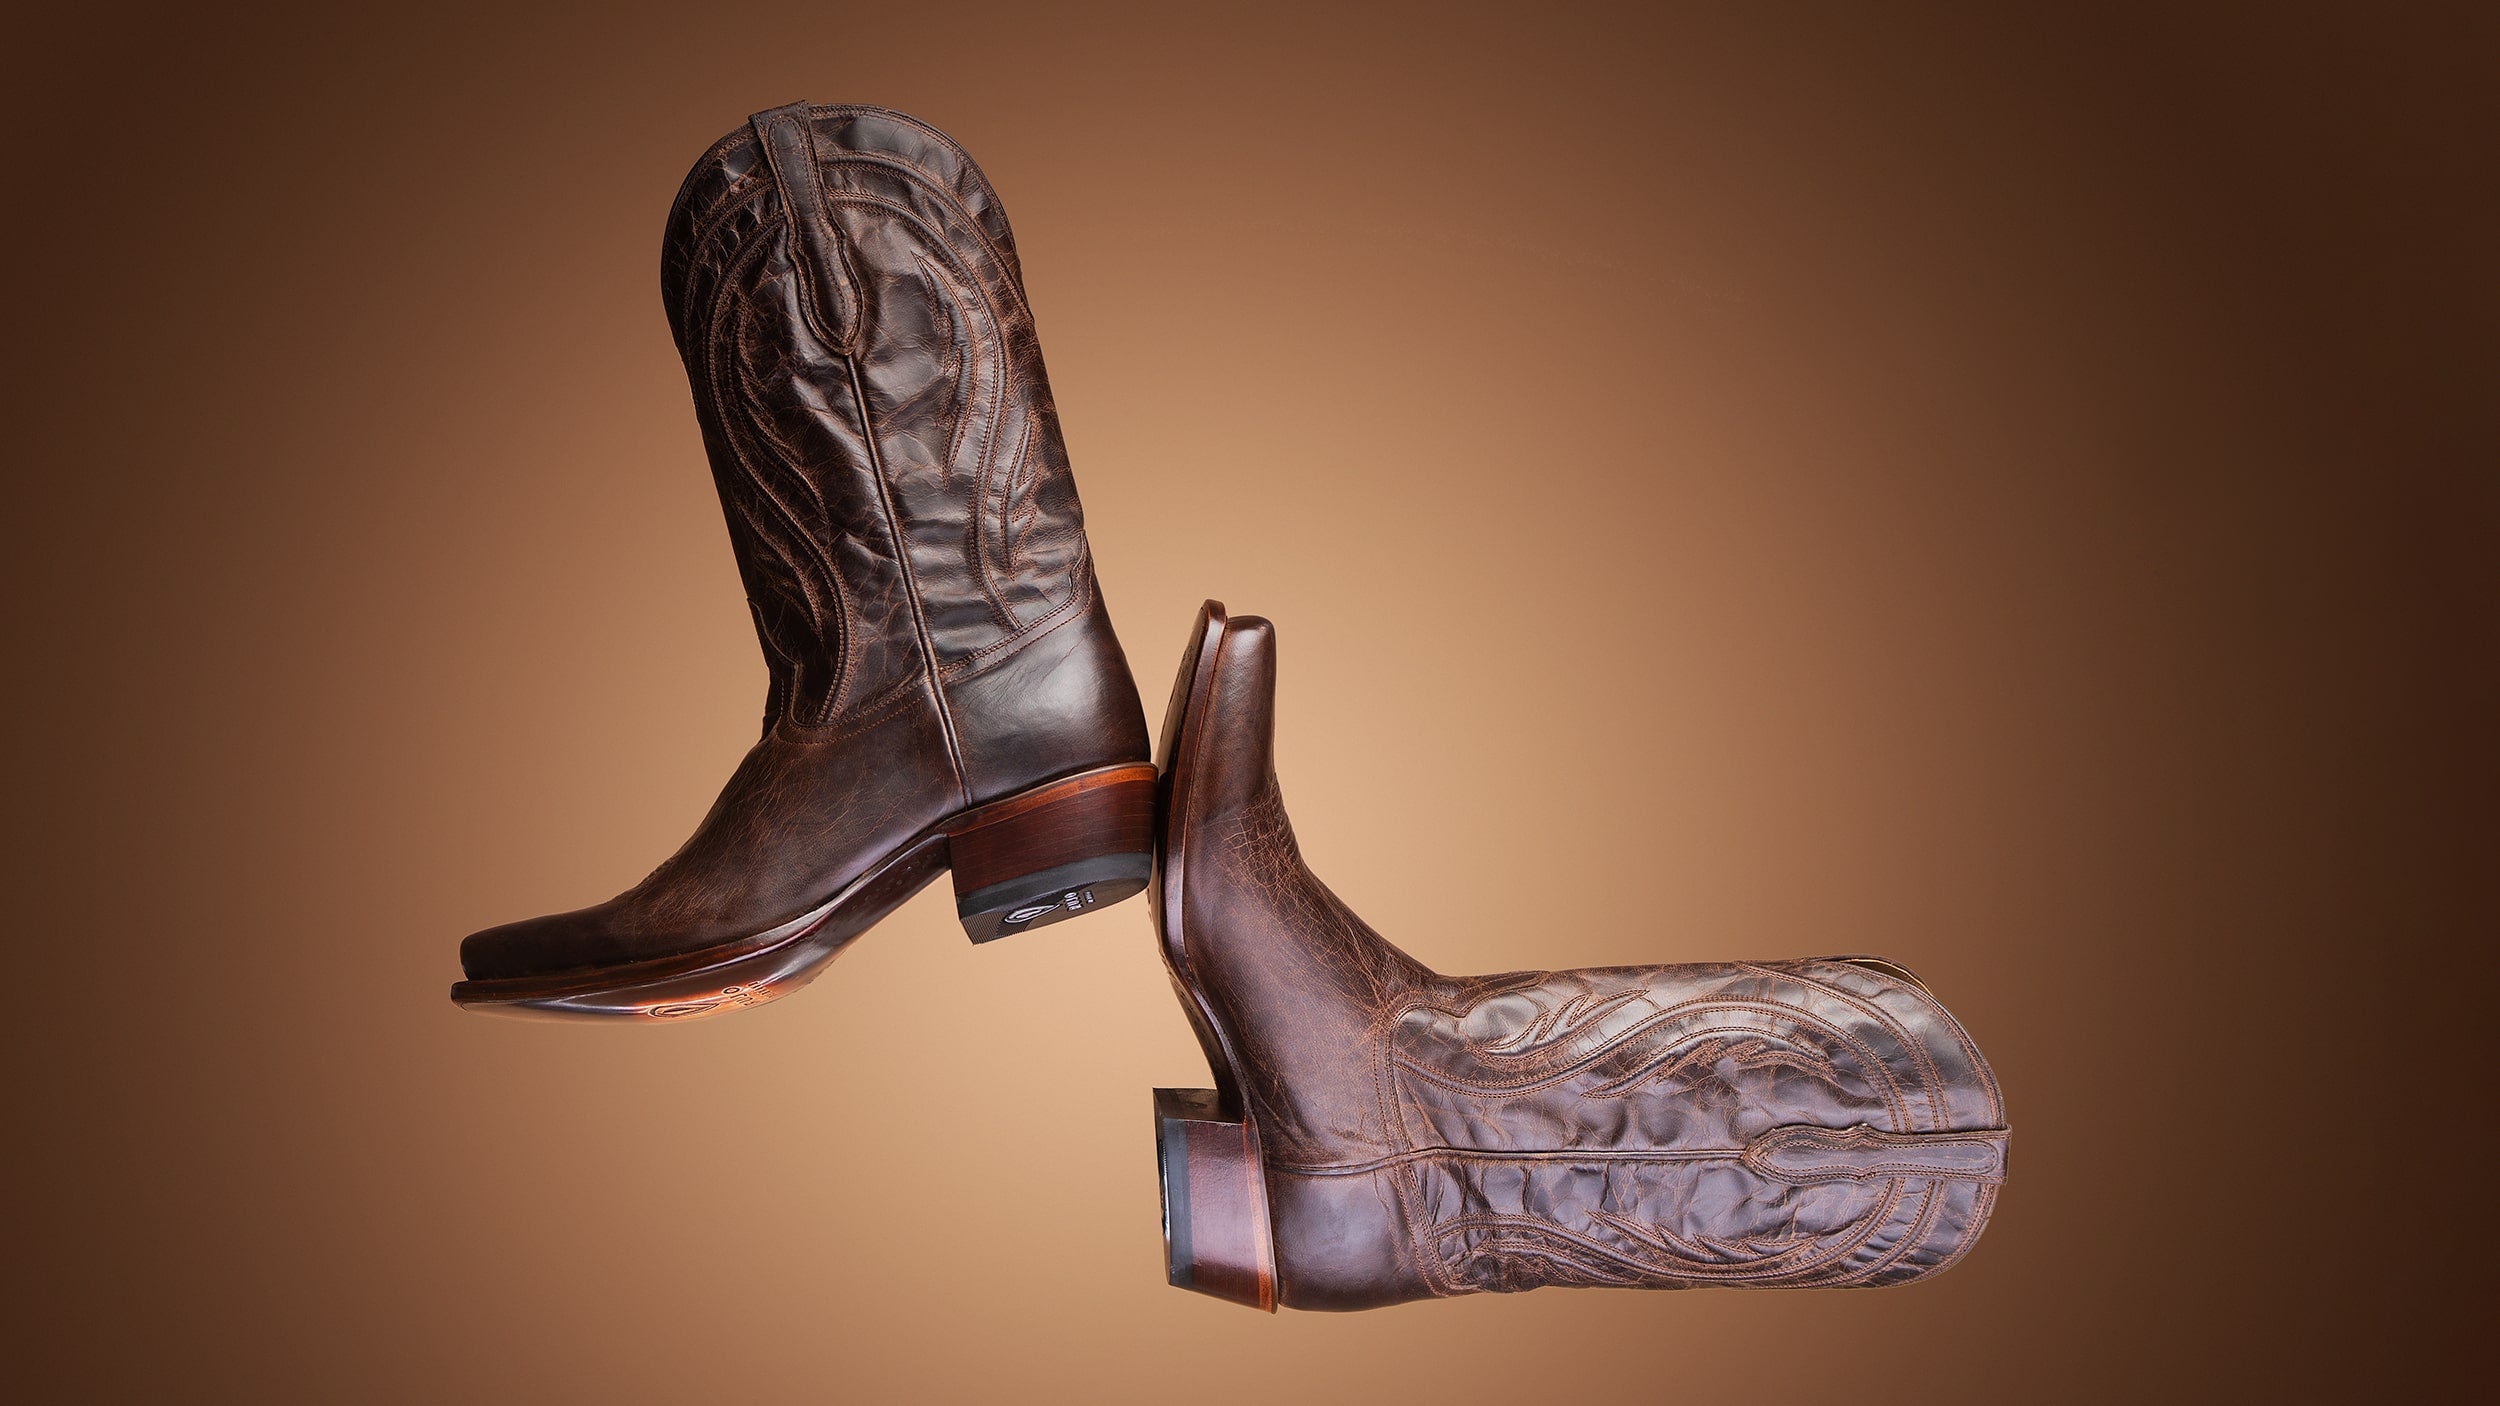 A pair of RUJO Mad Dog Leather cowboy boots in the studio